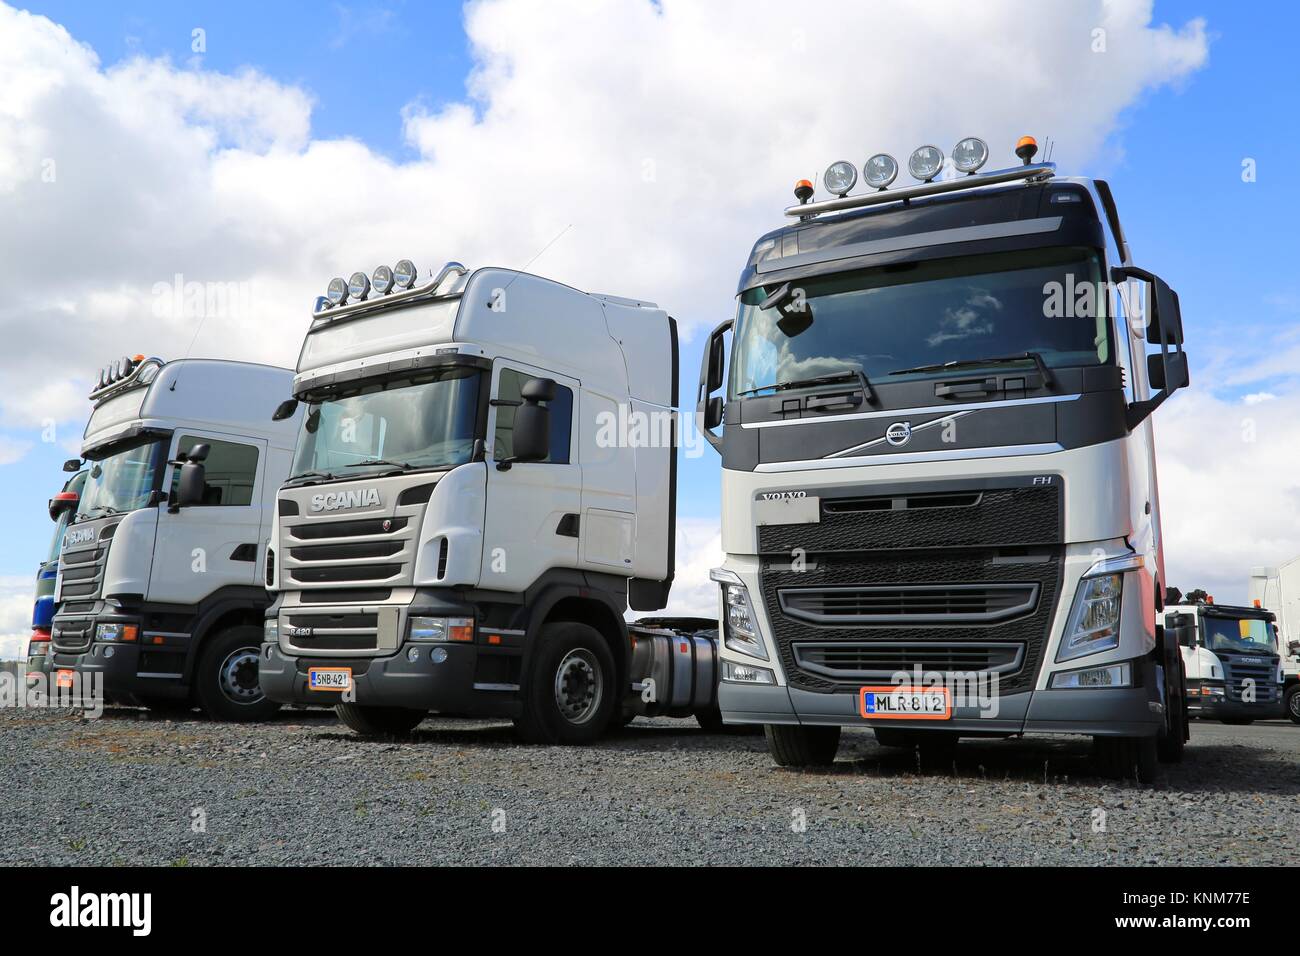 FORSSA, FINLAND - MAY 2, 2014: Row of Volvo and Scania heavy truck tractors parked. Demand for heavy trucks is increasing while the need for medium-du Stock Photo